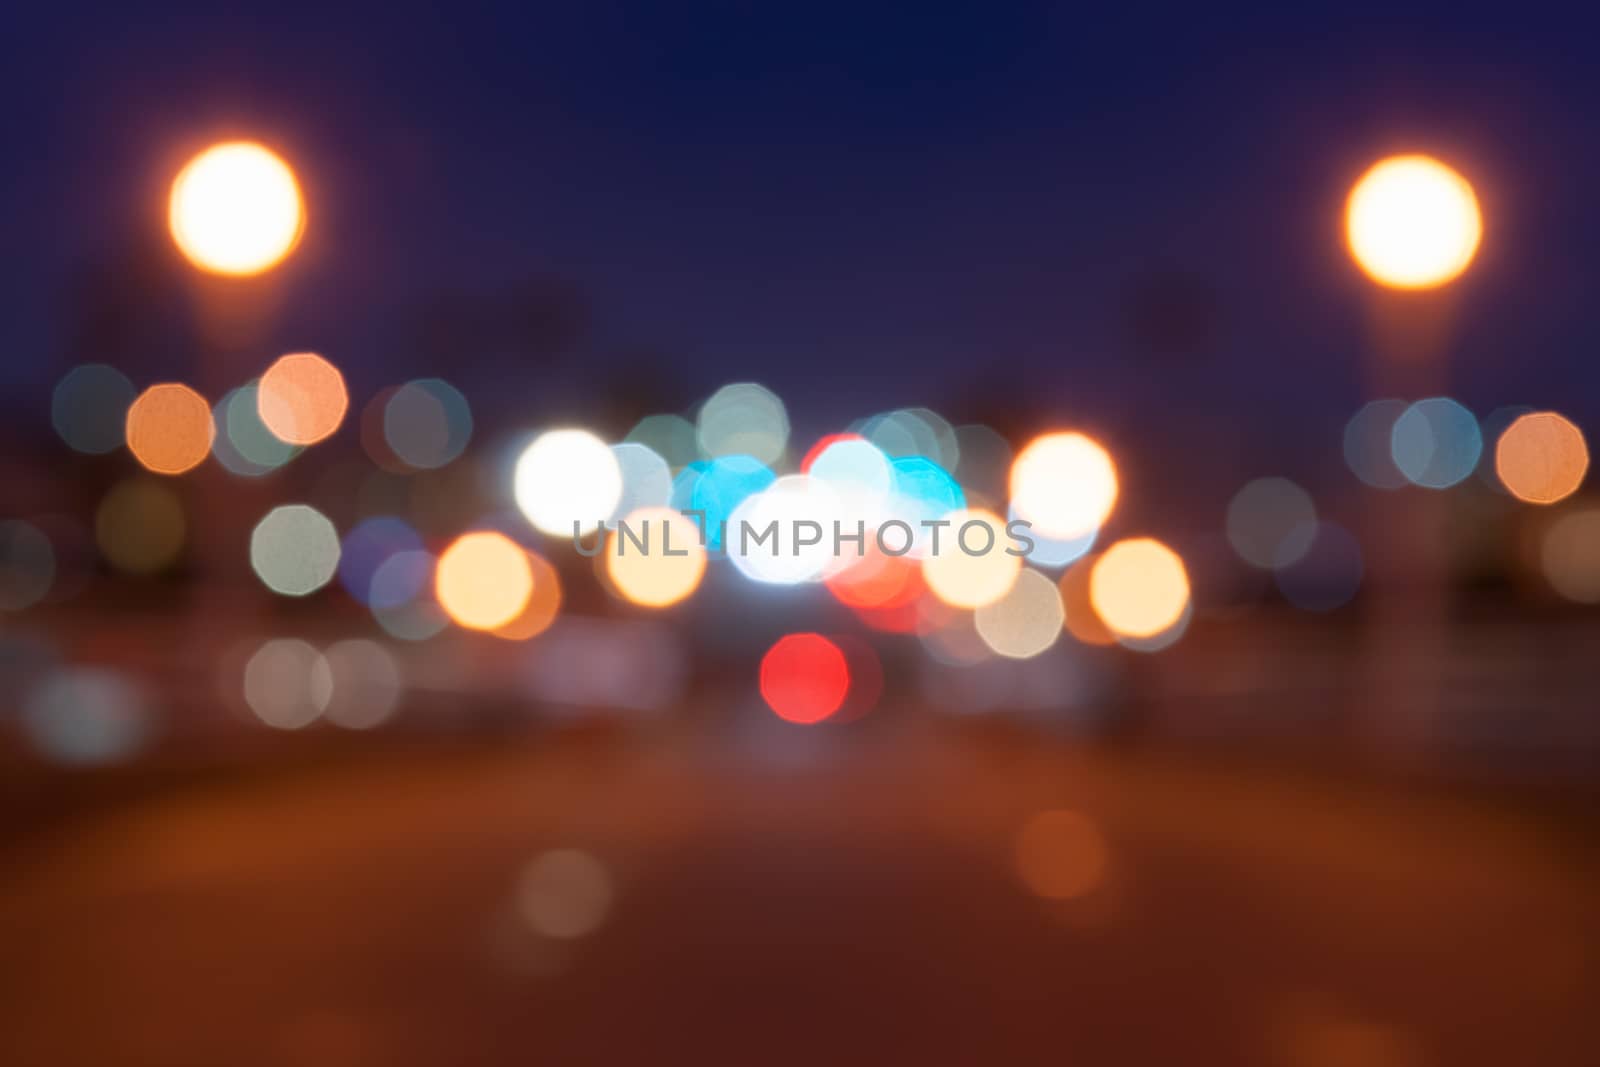 Magical glowing blurred out of focus urban night shot  background street  lights effect.